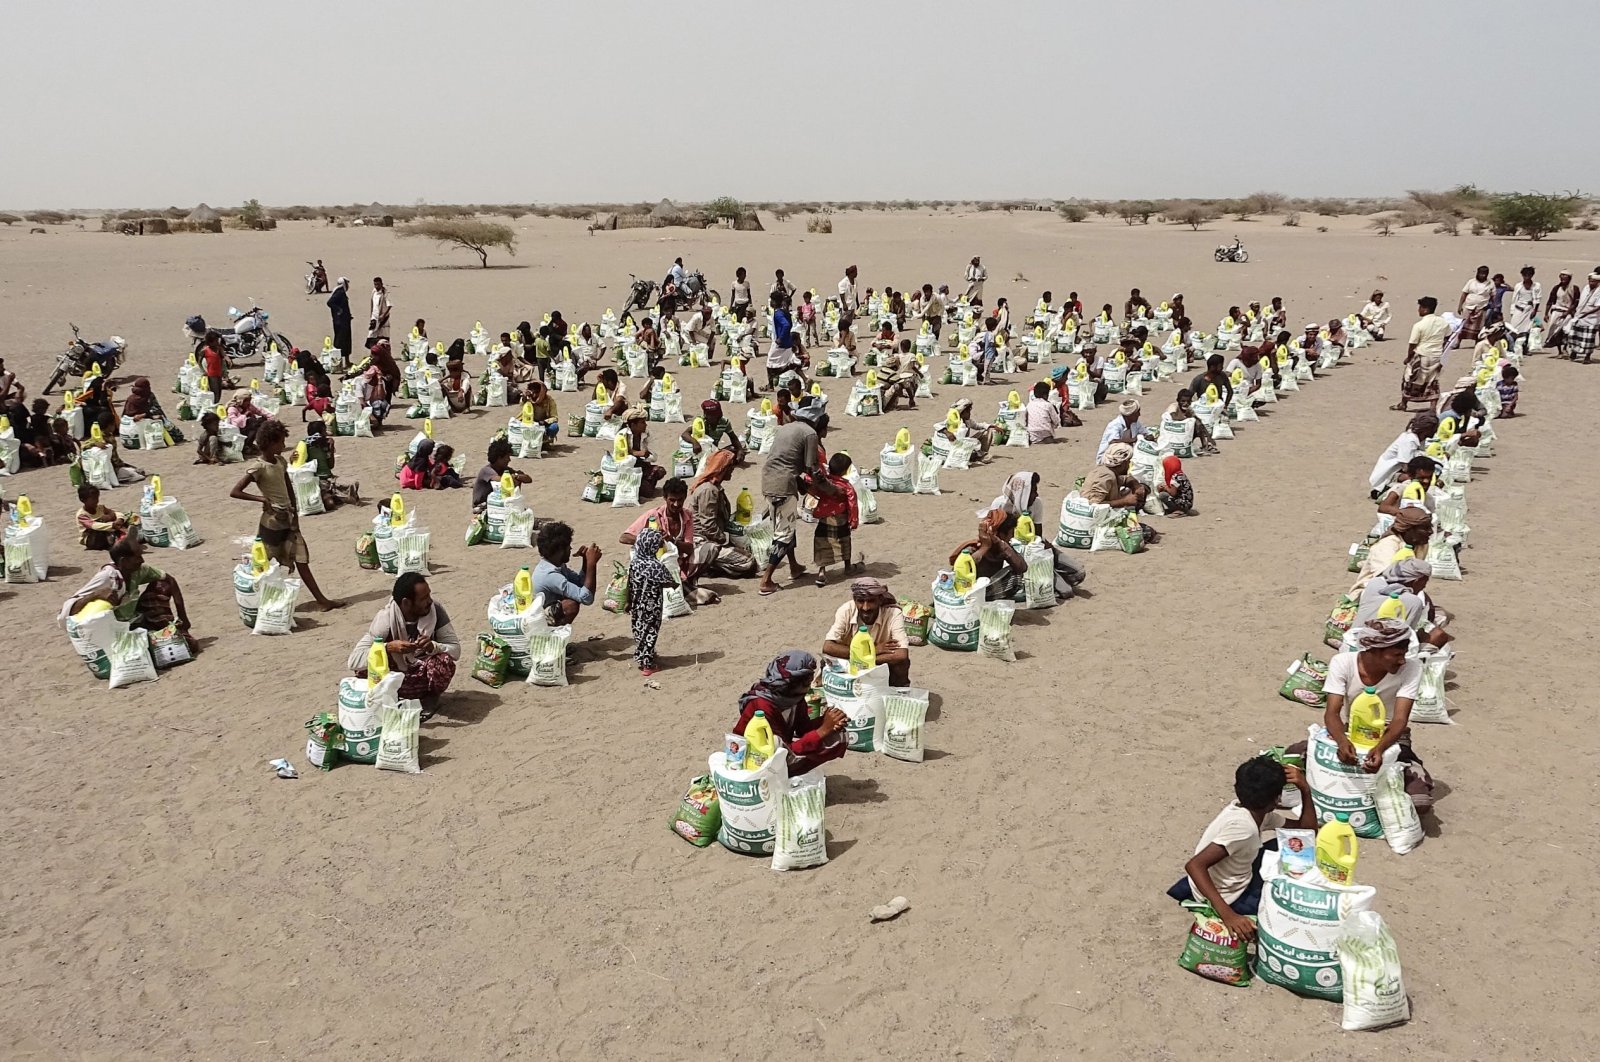 Yemenis displaced by the conflict receive food aid and supplies to meet their basic needs, at a camp in Hays district in the war-ravaged western province of Hodeida,  July 6, 2022. (AFP File Photo)